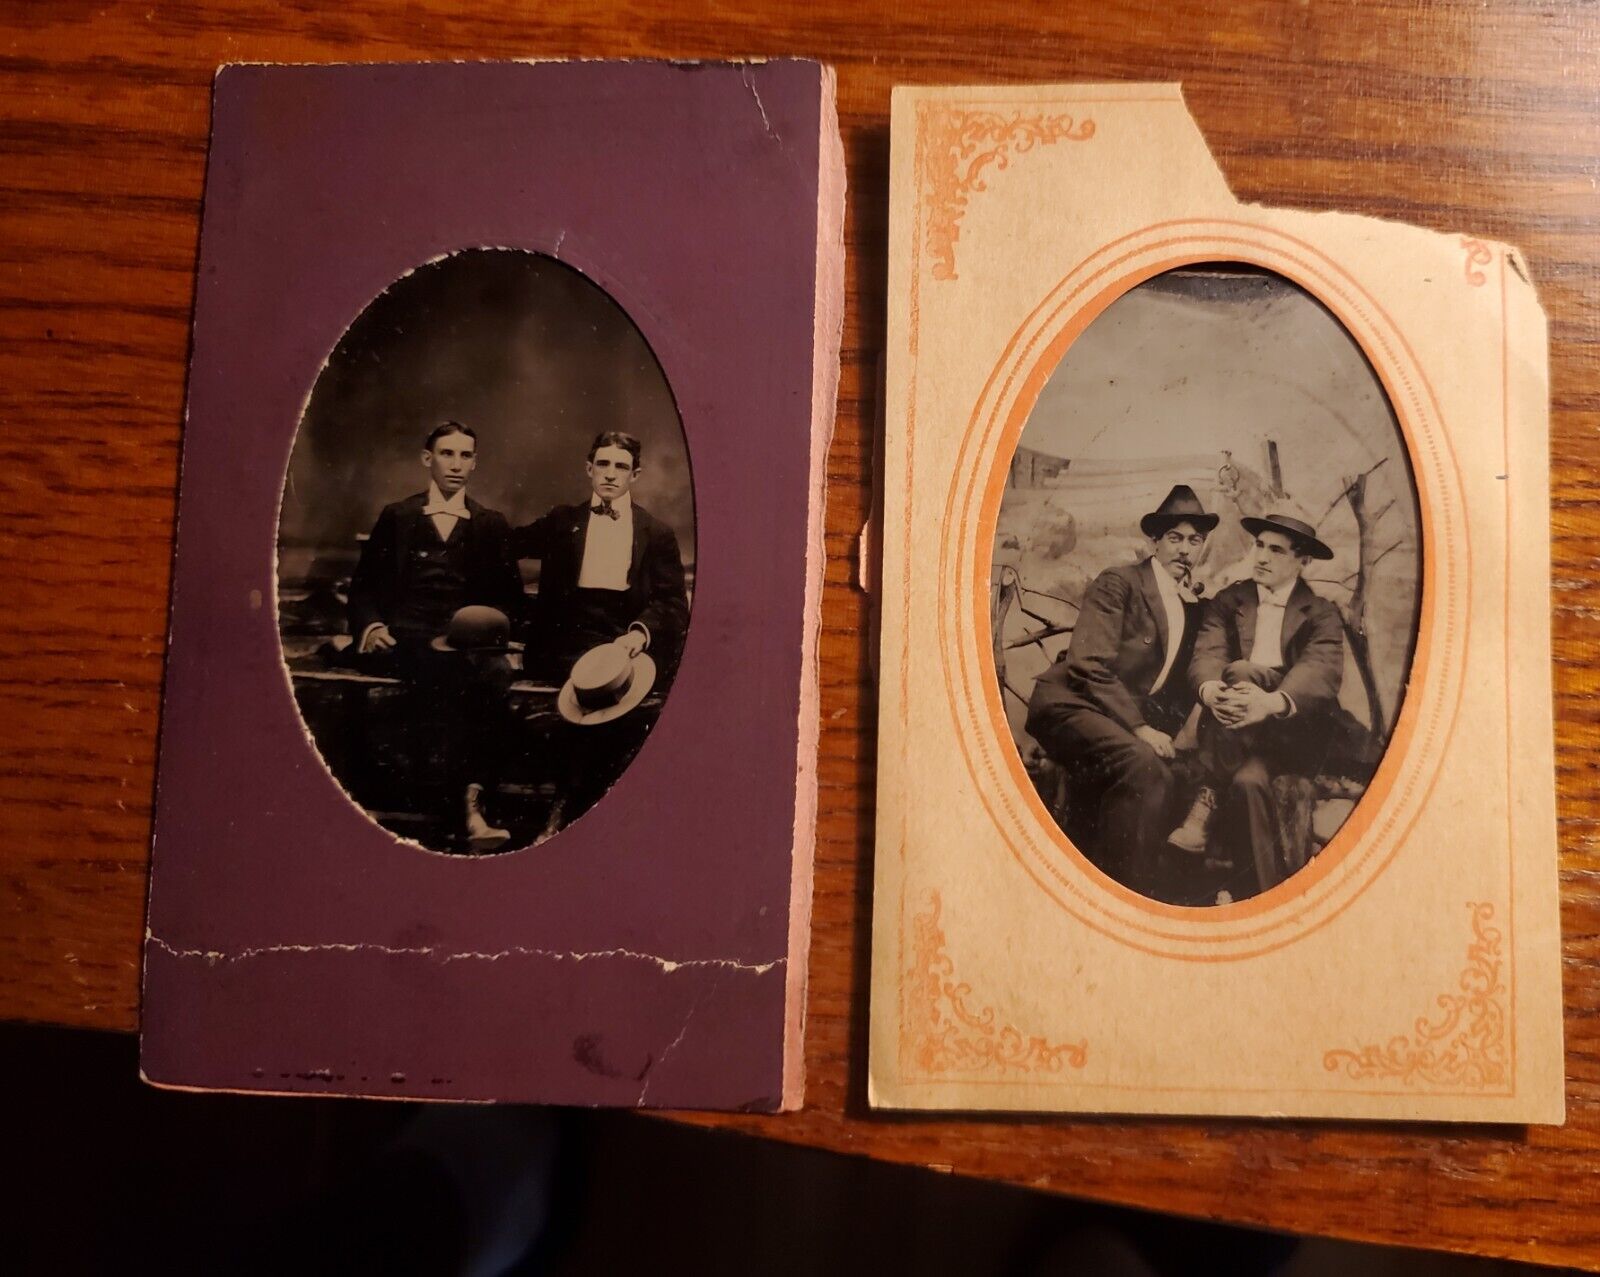 Two ANTIQUE AFFECTIONATE MEN TINTYPE PHOTO GAY INTEREST